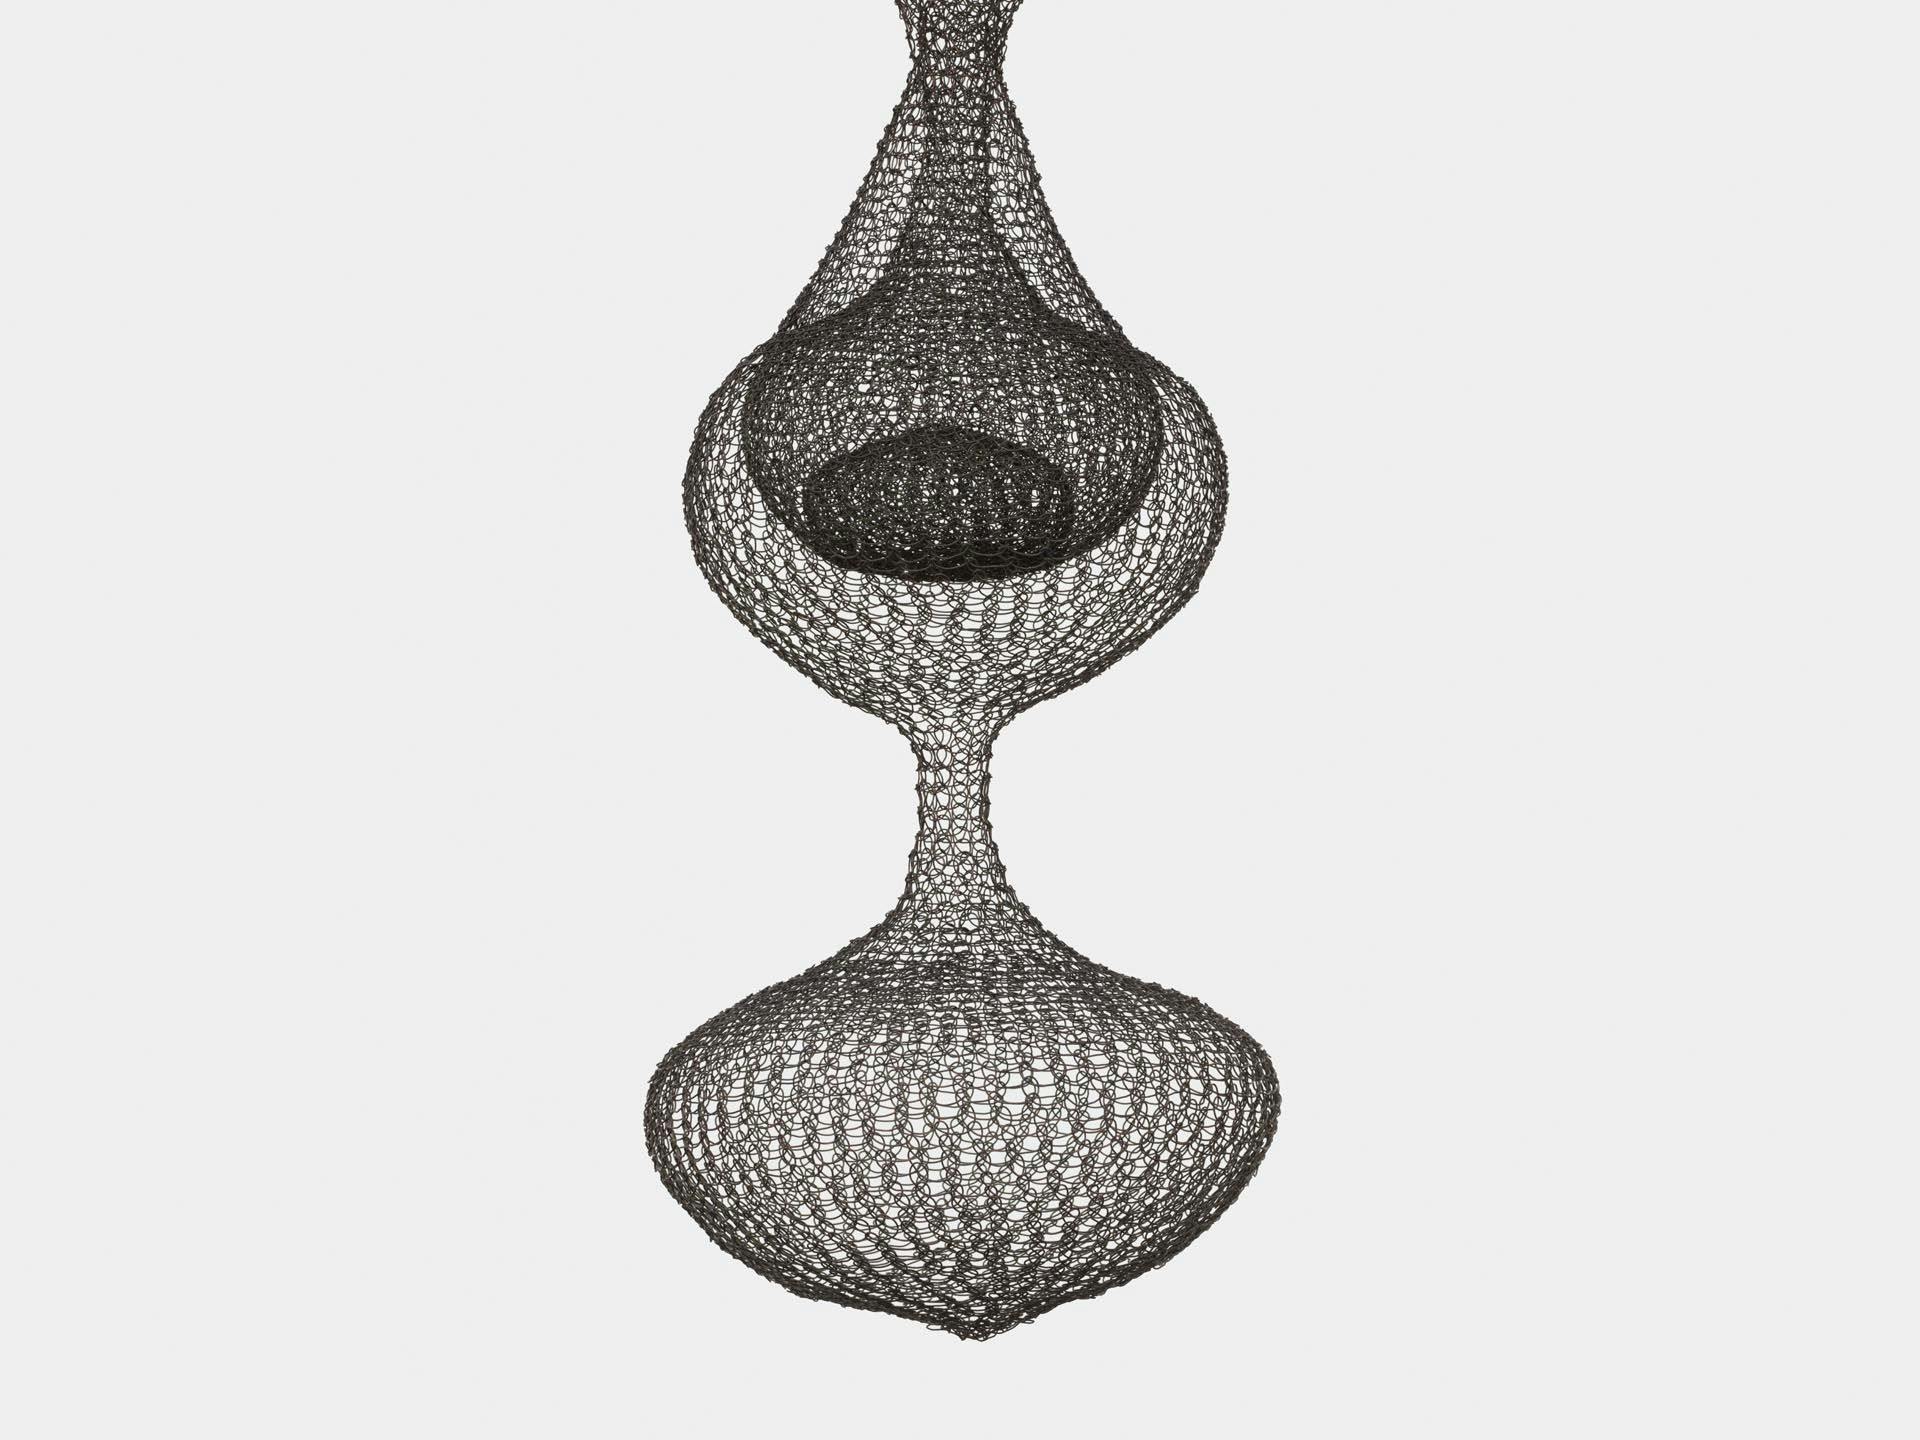 A detail of a sculpture by Ruth Asawa, titled Untitled (S.272, Hanging Seven-Lobed, Continuous Interwoven Form, with Spheres within Two Lobes), dated  circa 1954.